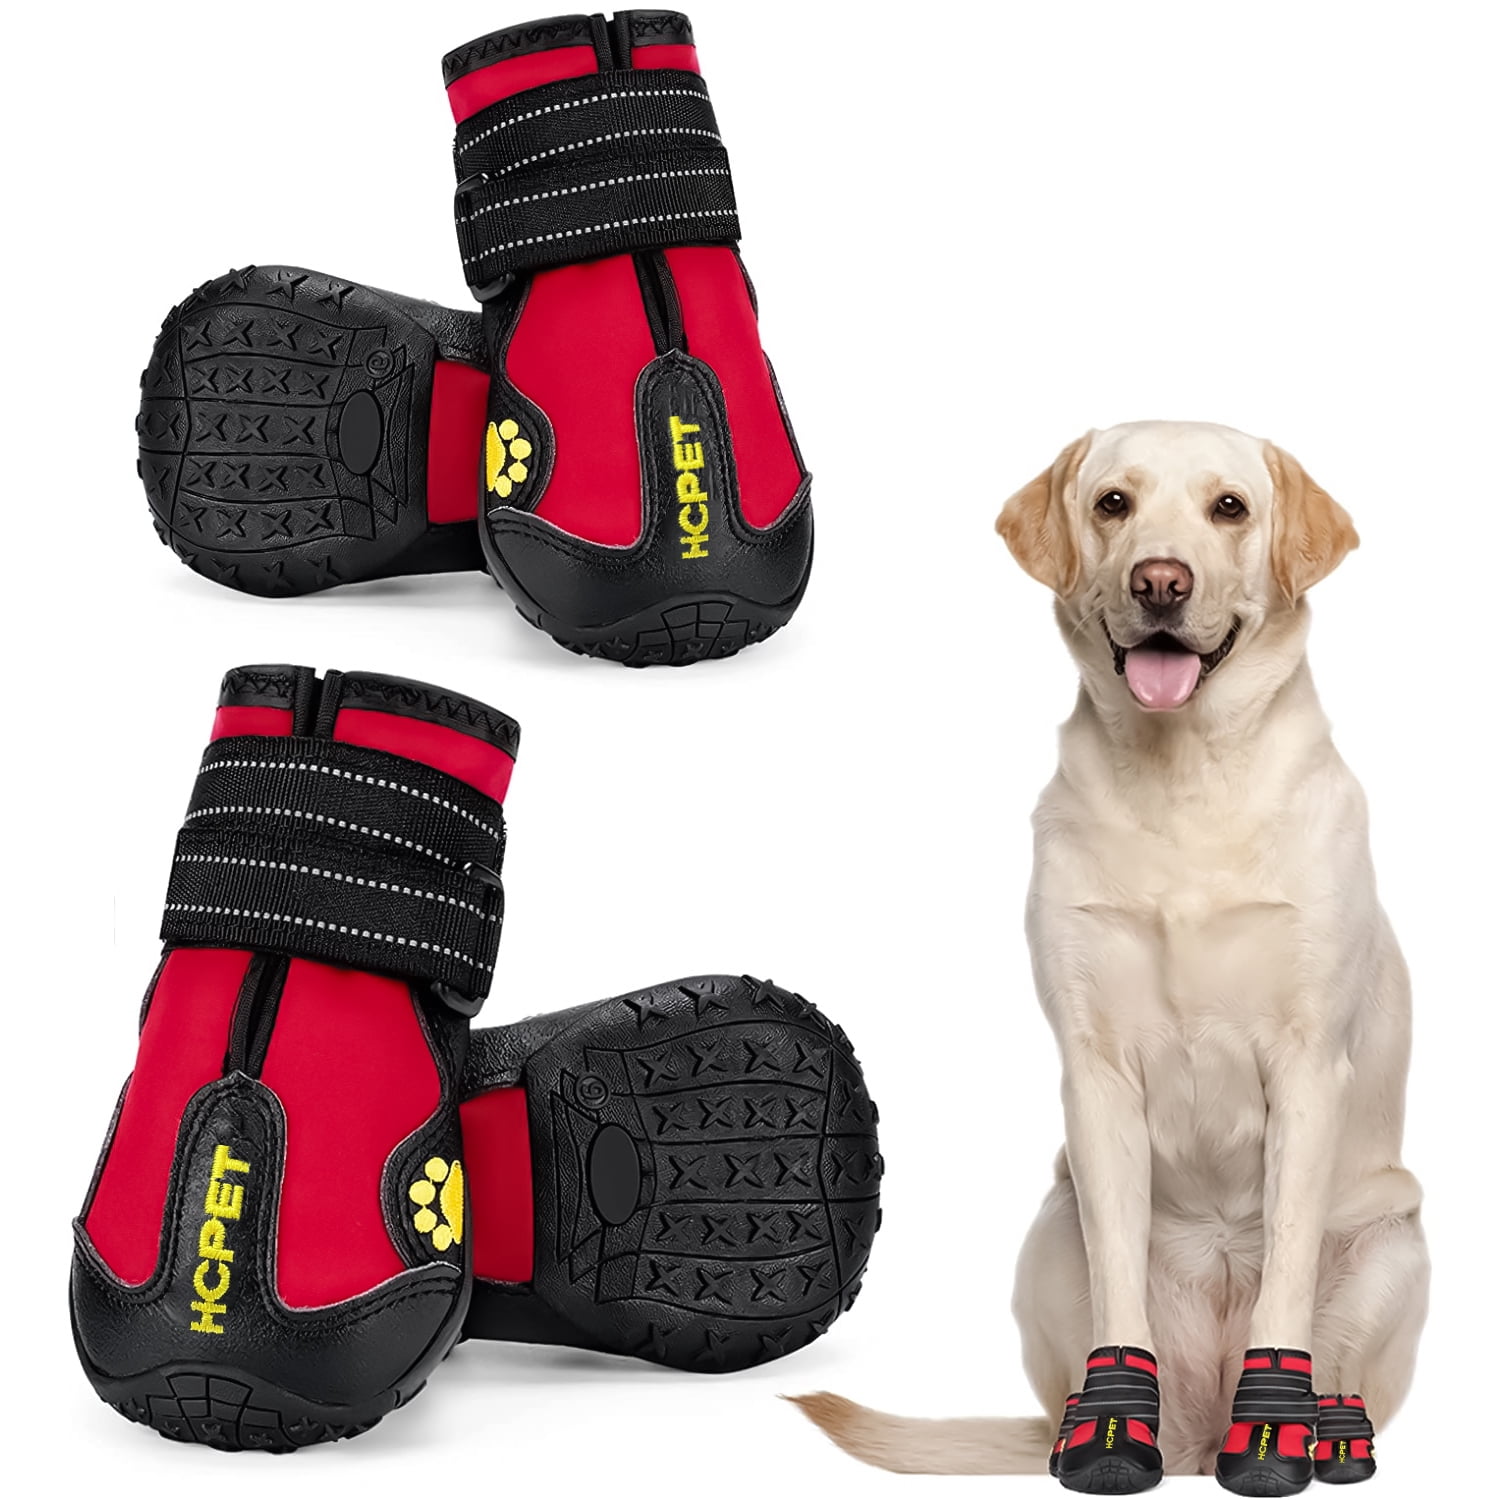 XSY&G Dog Boots,Waterproof Dog Shoes,Dog Booties with Reflective Velcro Rugged Anti-Slip Sole and Skid-Proof,Outdoor Dog Shoes for Medium to Large Dogs 4Ps 